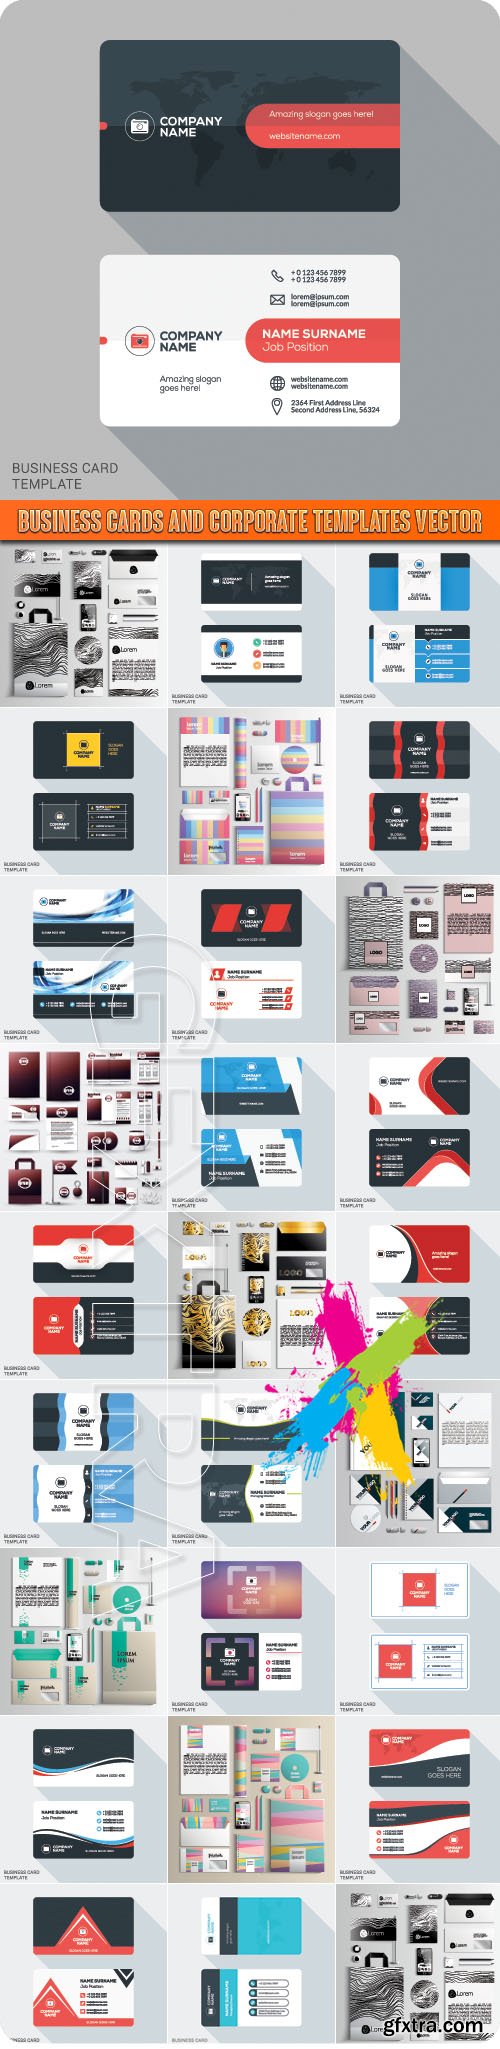 Business Cards and Corporate Identity Templates vector